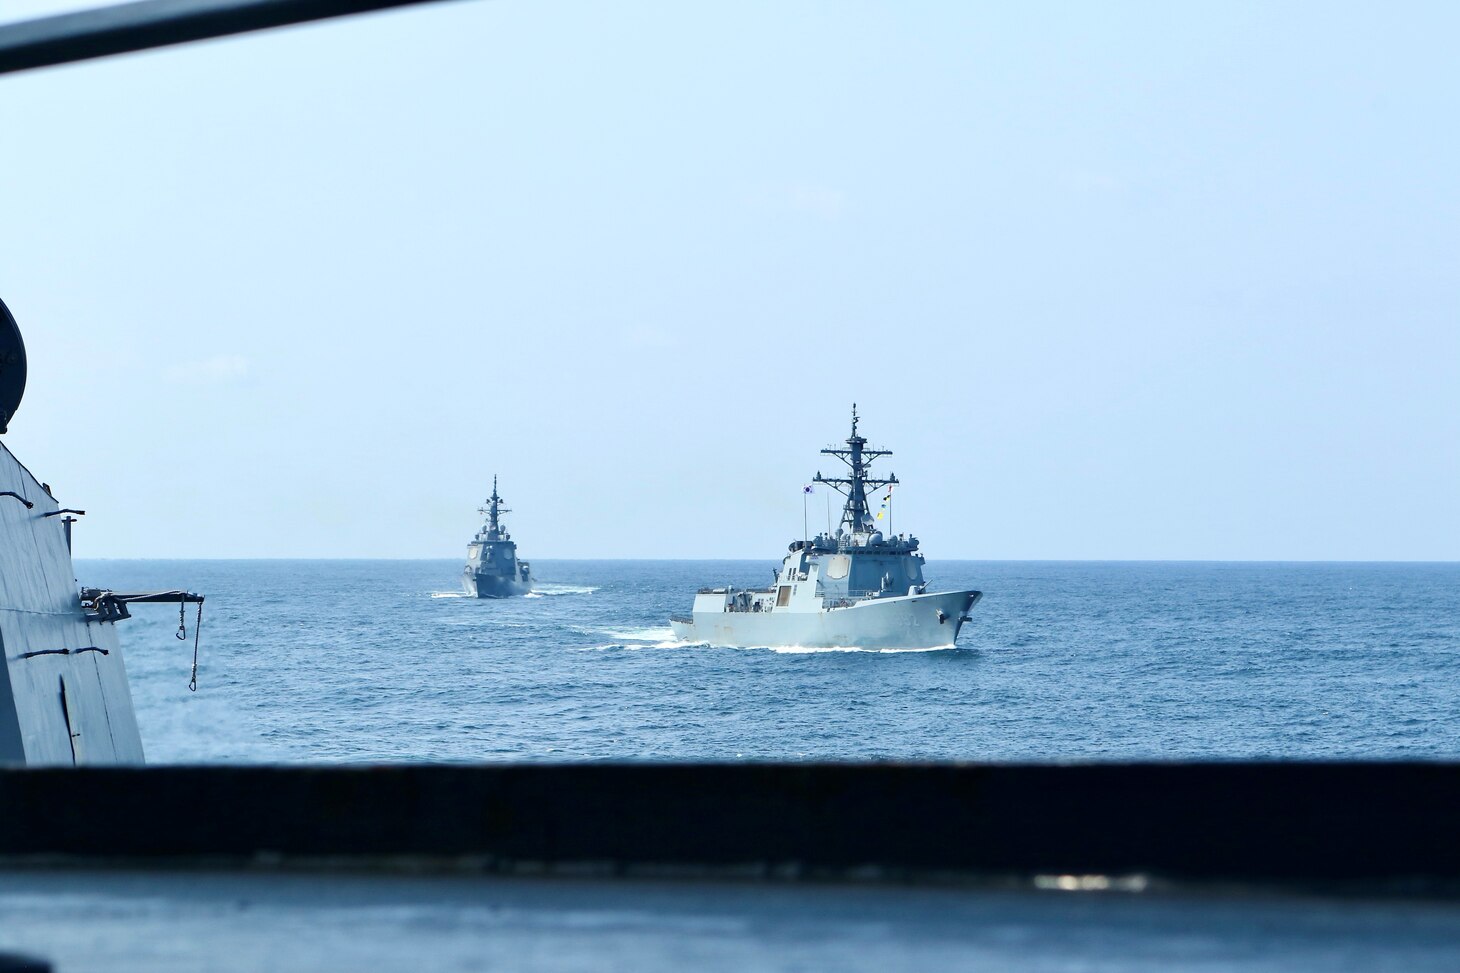 Japan Maritime Self-Defense Force guided-missile destroyer JS Atago (DDG 177) and Republic of Korea Navy Sejong the Great-class destroyer ROKS YulGok Yi I (DDG 992) steam alongside the Arleigh Burke-class guided-missile destroyer USS Benfold (DDG 65) during a trilateral maritime exercise focused on ballistic missile defense integration and shipboard maneuvers. Benfold is underway in the U.S. 7th Fleet area of operations as part of Destroyer Squadron 15. U.S. 7th Fleet is the U.S. Navy‘s largest forward-deployed numbered fleet, and routinely interacts and operates with allies and partners in preserving a free and open Indo-Pacific region. (U.S. Navy photo by Seaman Alexis Pelletier)